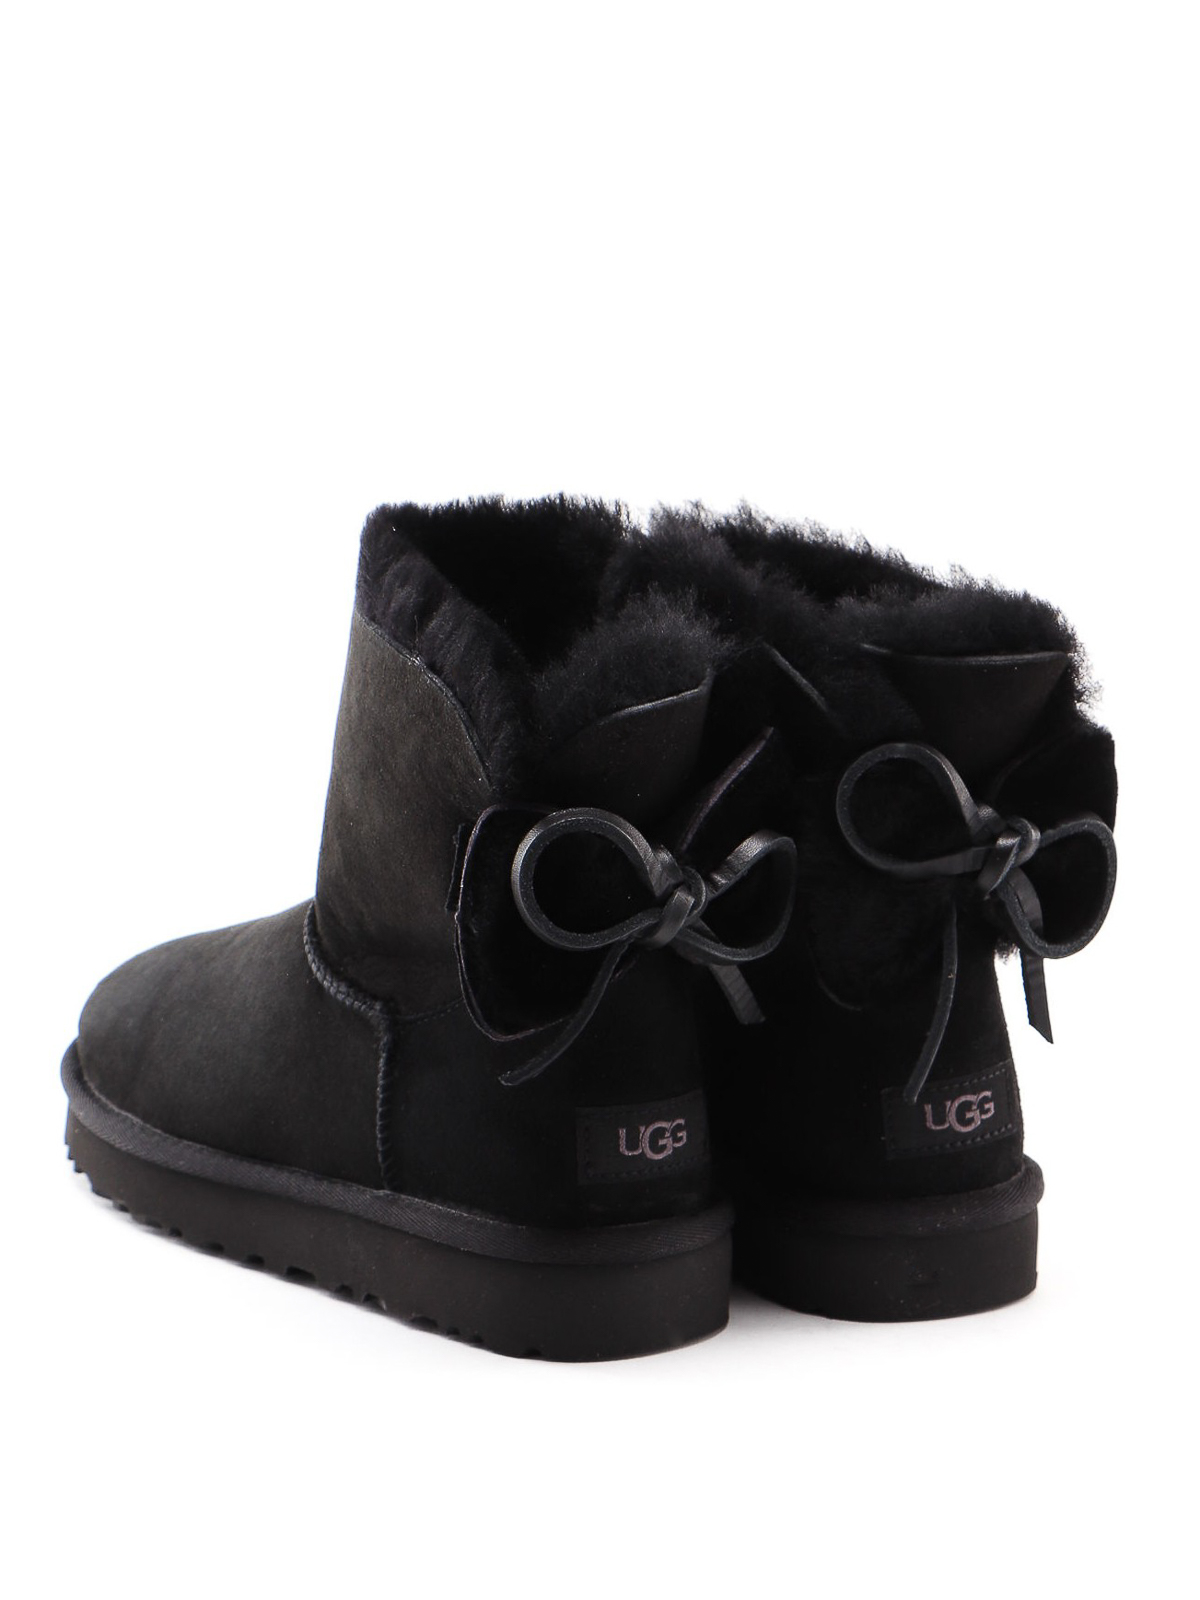 ugg classic double bow